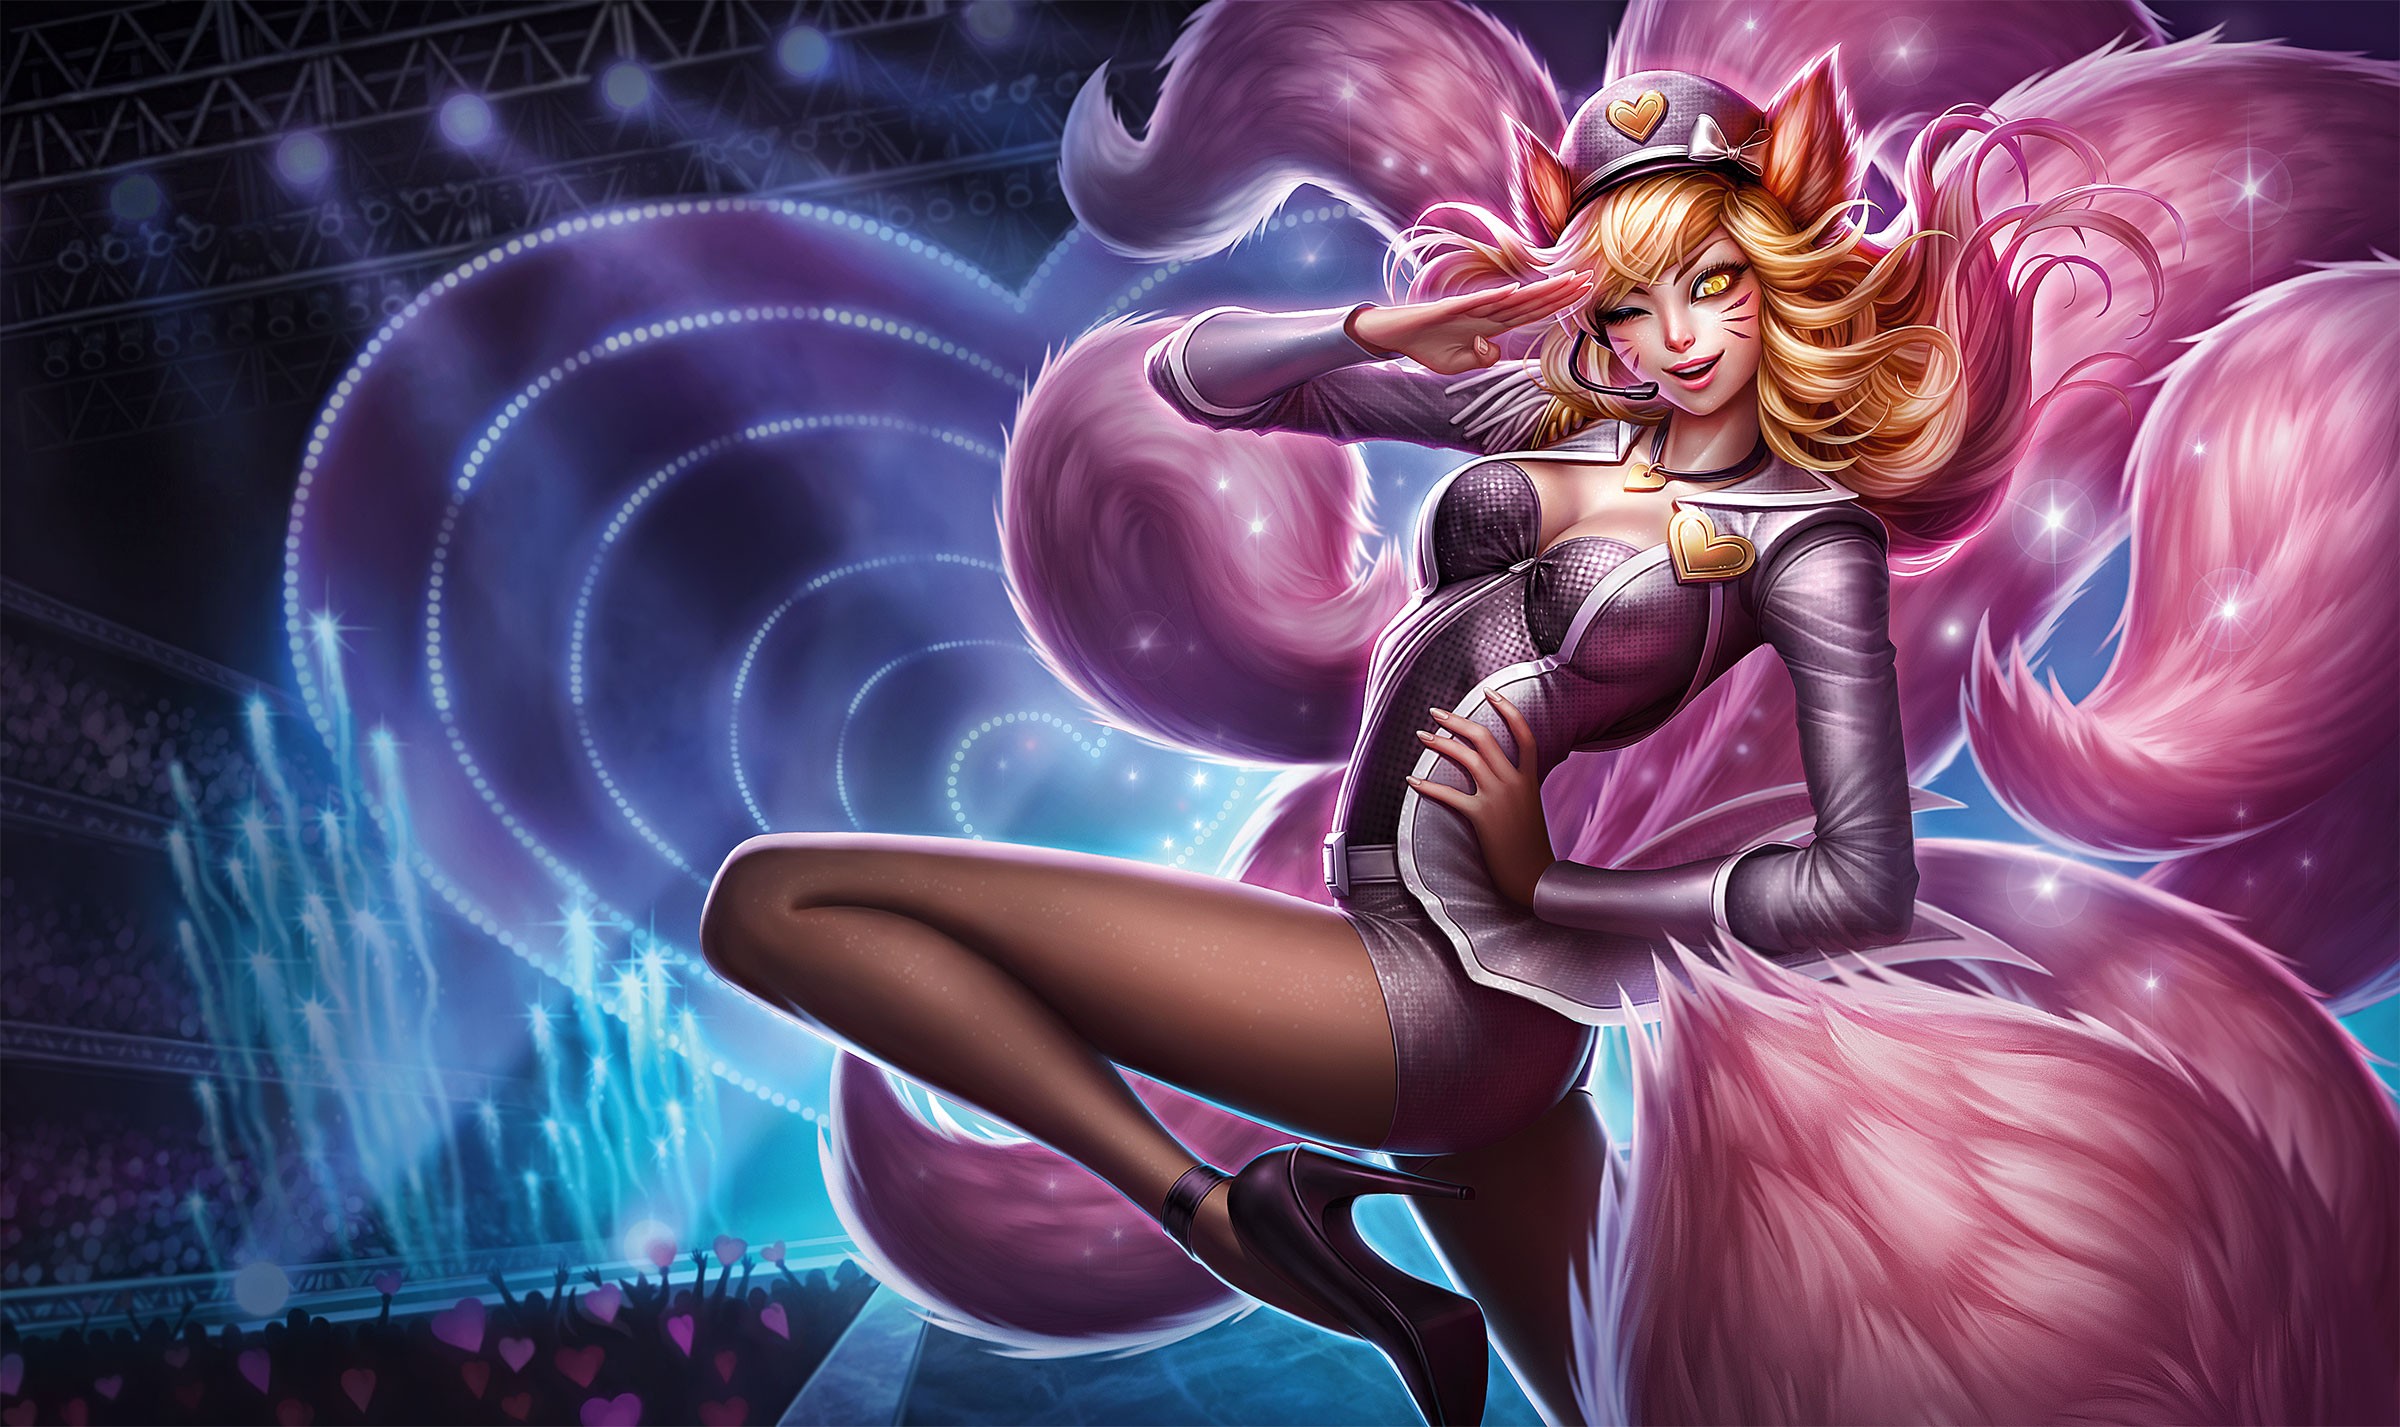 Anime 2400x1427 anime anime girls League of Legends Ahri (League of Legends) animal ears cleavage heels tail long hair yellow eyes open shirt